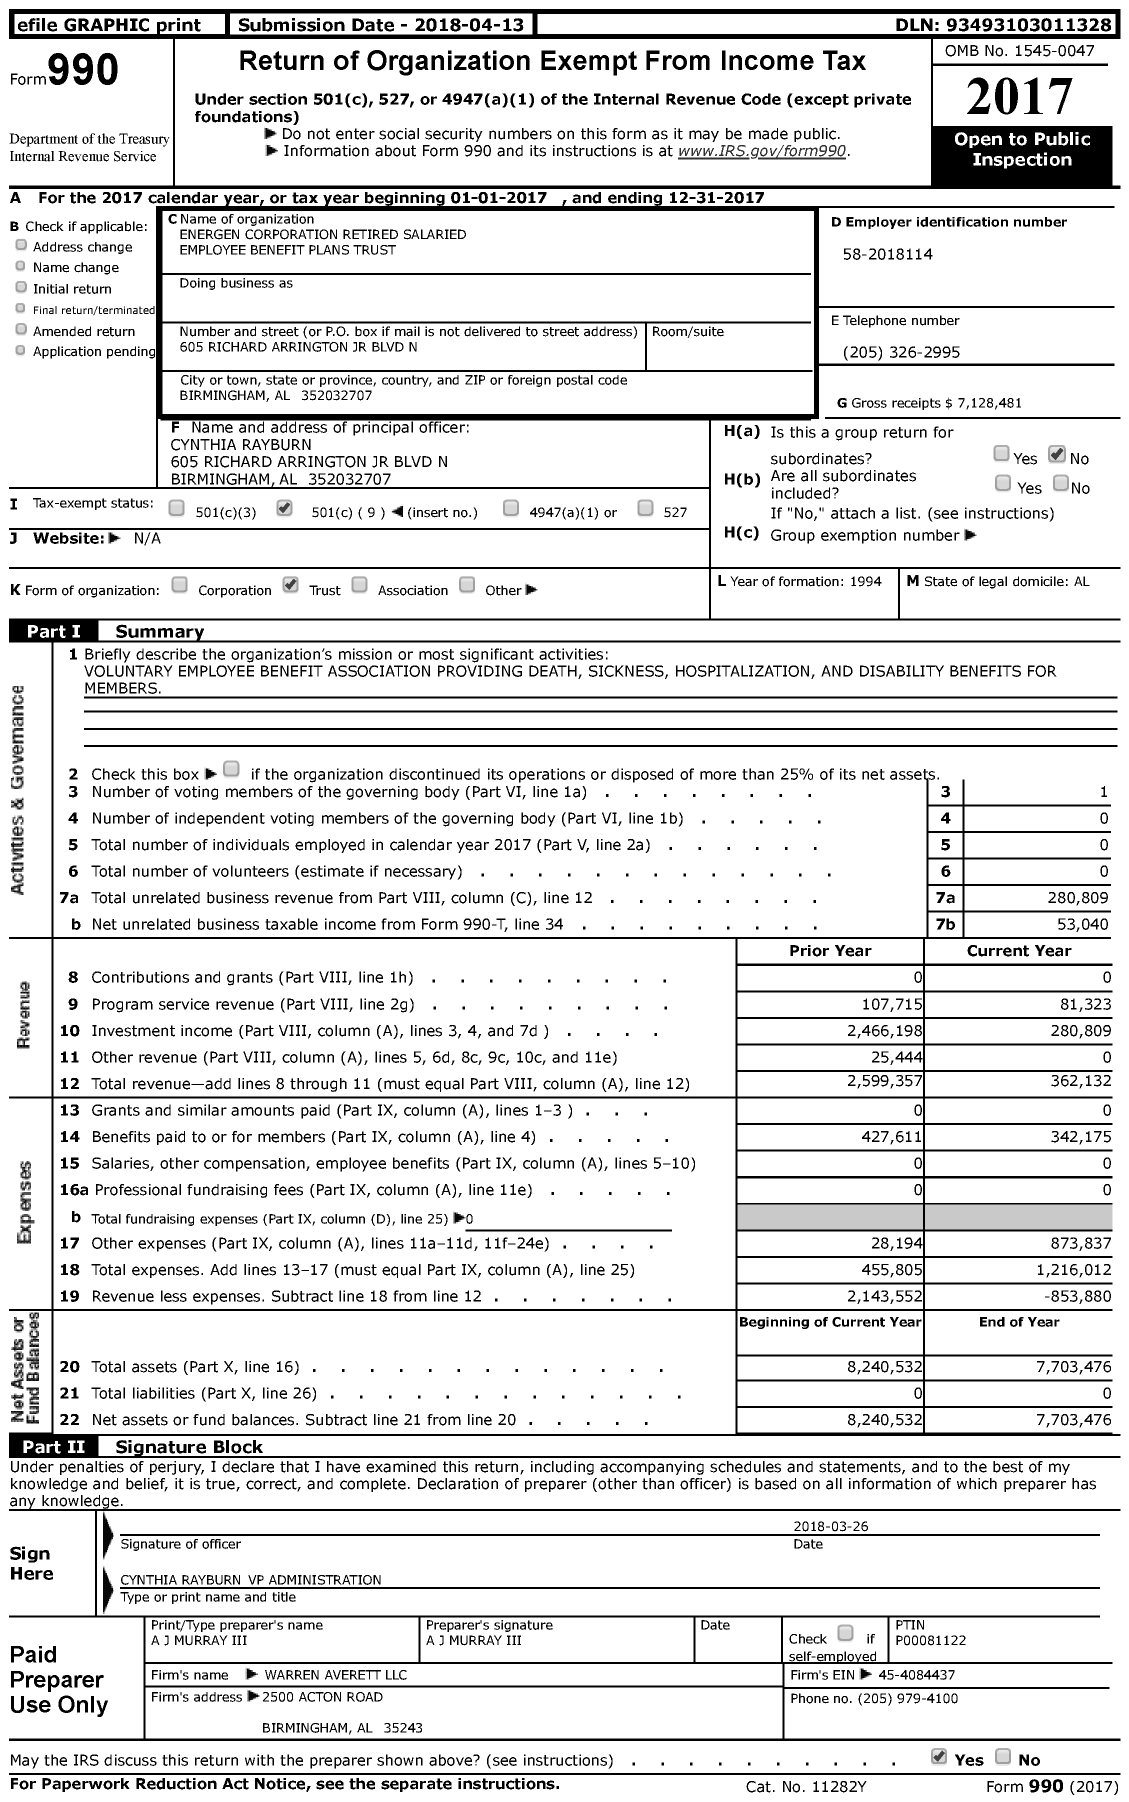 Image of first page of 2017 Form 990 for Energen Corporation Retired Salaried Employee Benefit Plans Trust Agreement